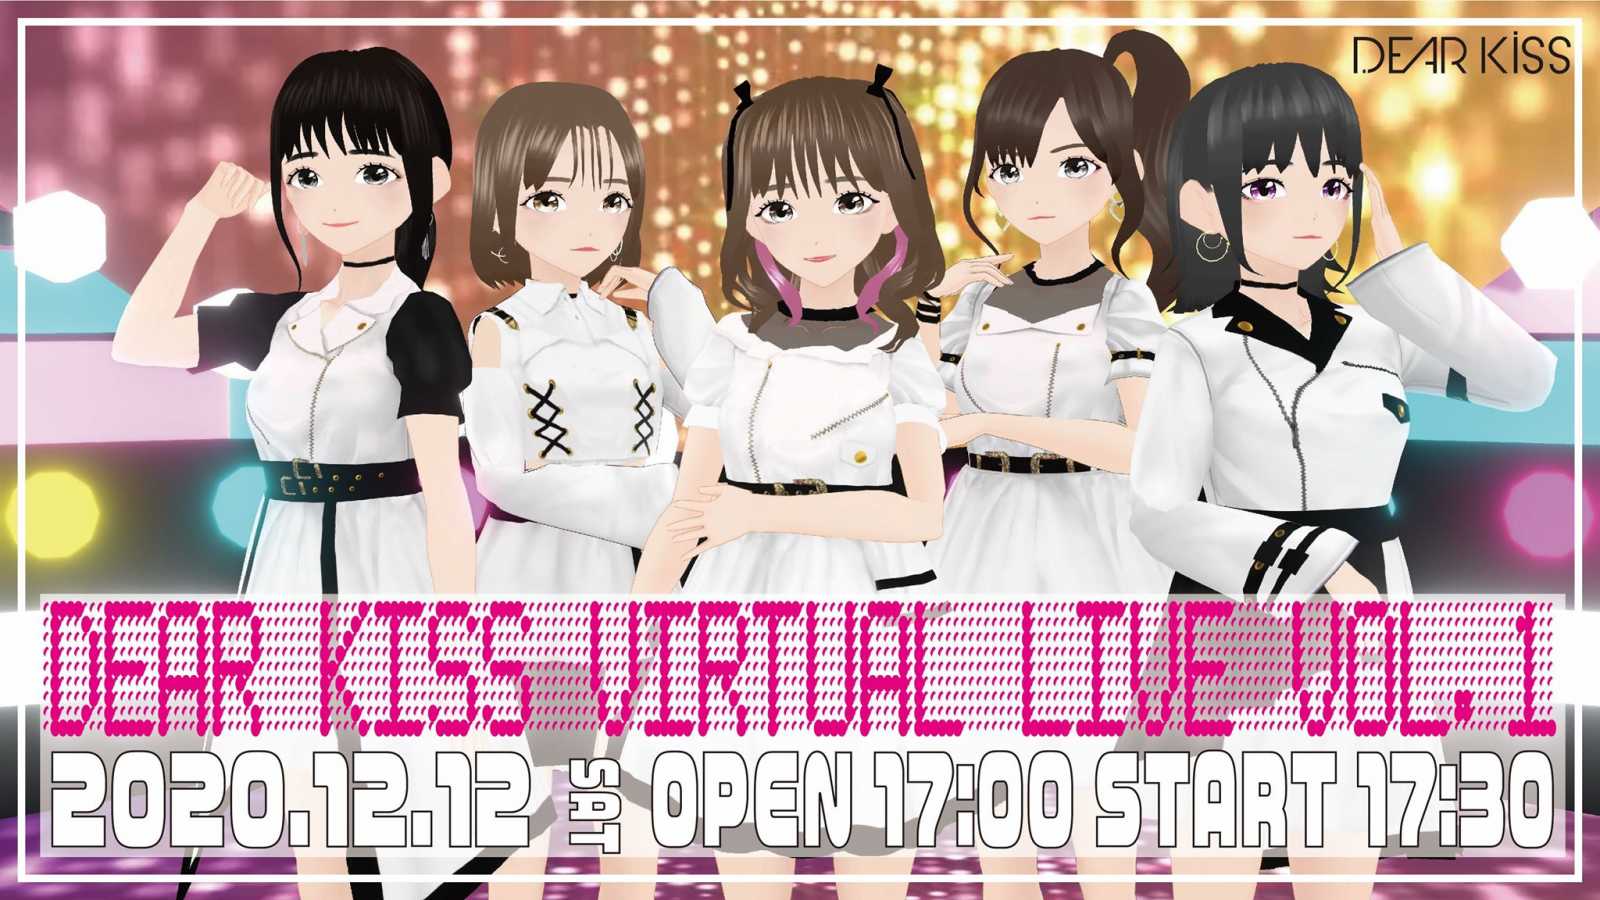 DEAR KISS to Live Stream Virtual Concert © DEAR KISS. All rights reserved.